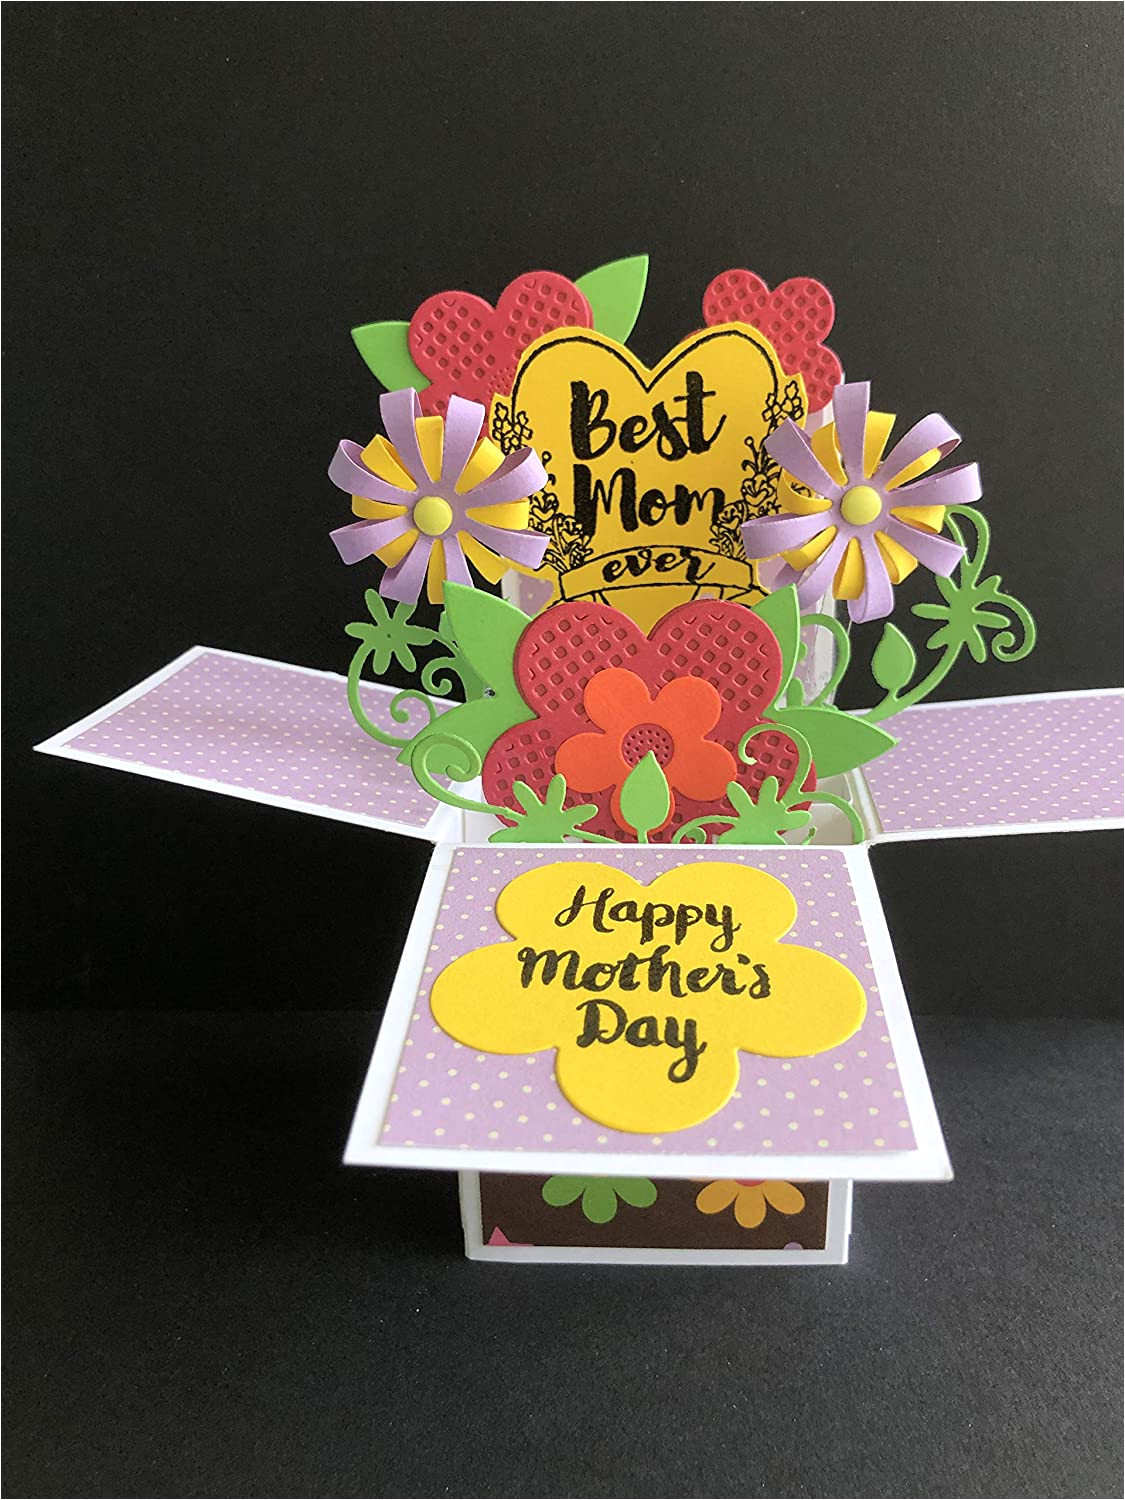 Pop Up Card Flower Mothers Day Amazon Com Mothers Day Card Handmade Card Flower Card